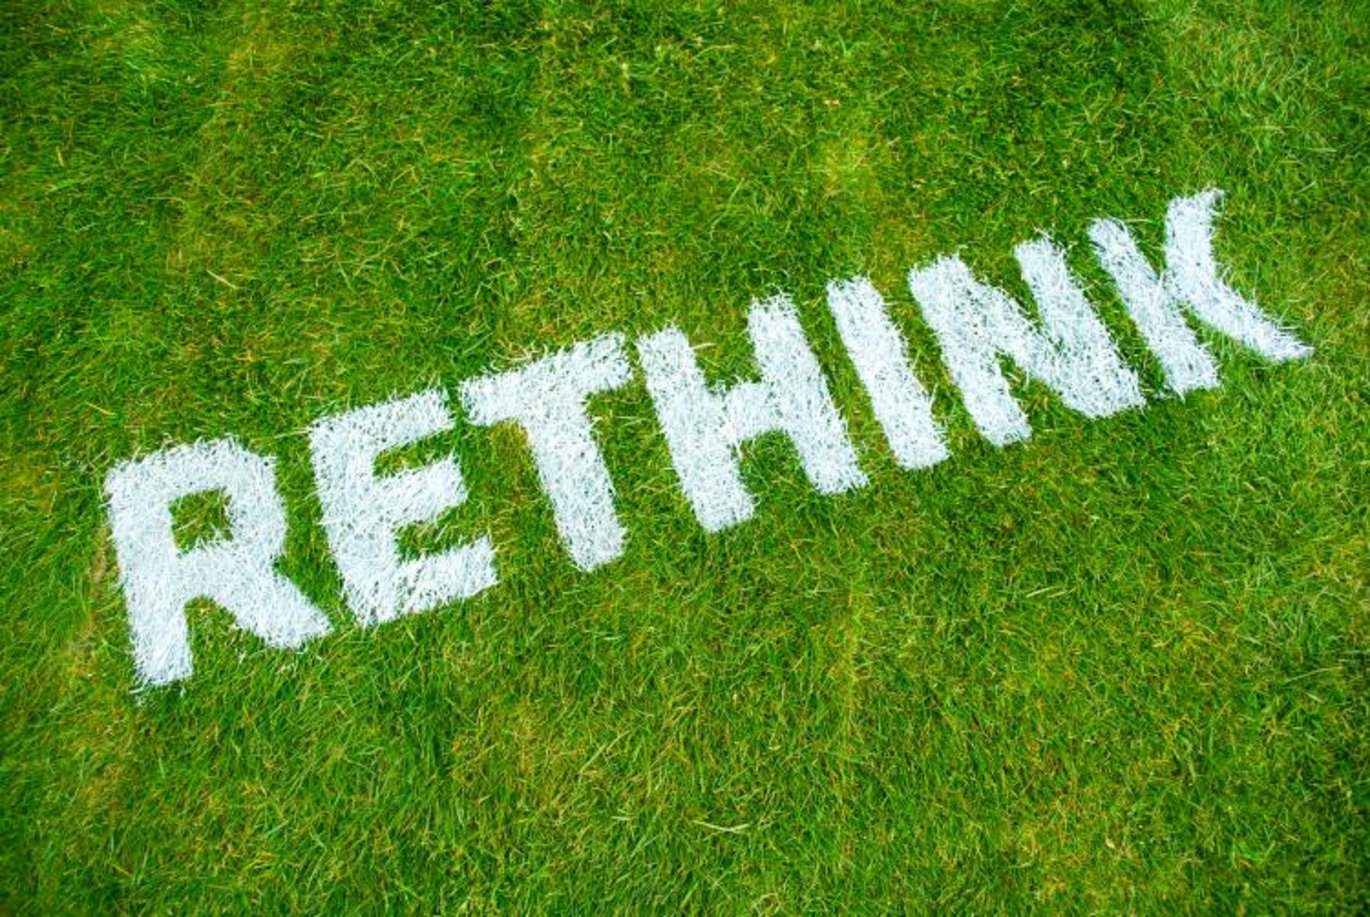 Image of green grass with "Rethink" written over.